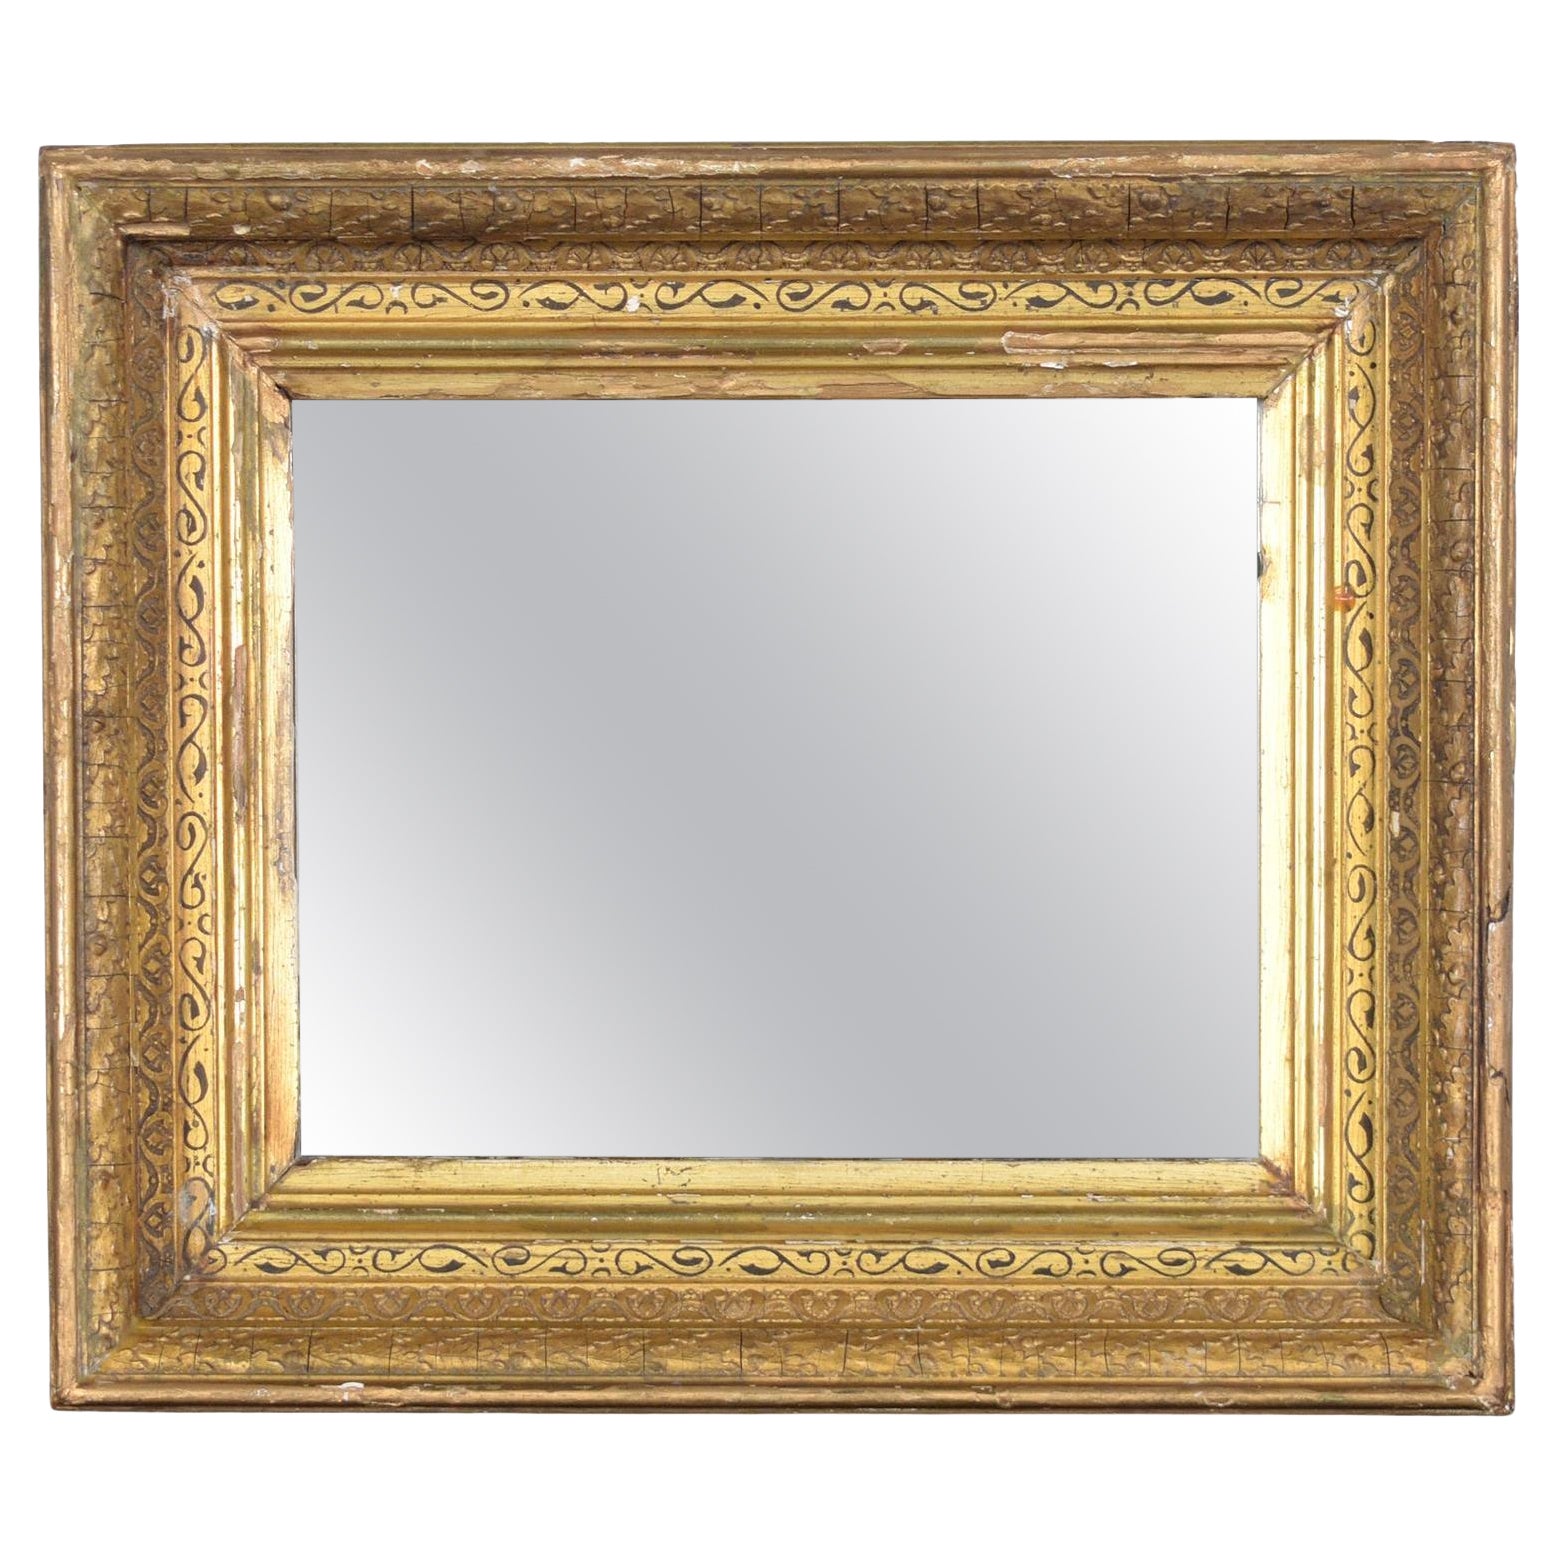 19th-Century French Antique Mirror: Restored Elegance with Water Gilt Finish For Sale